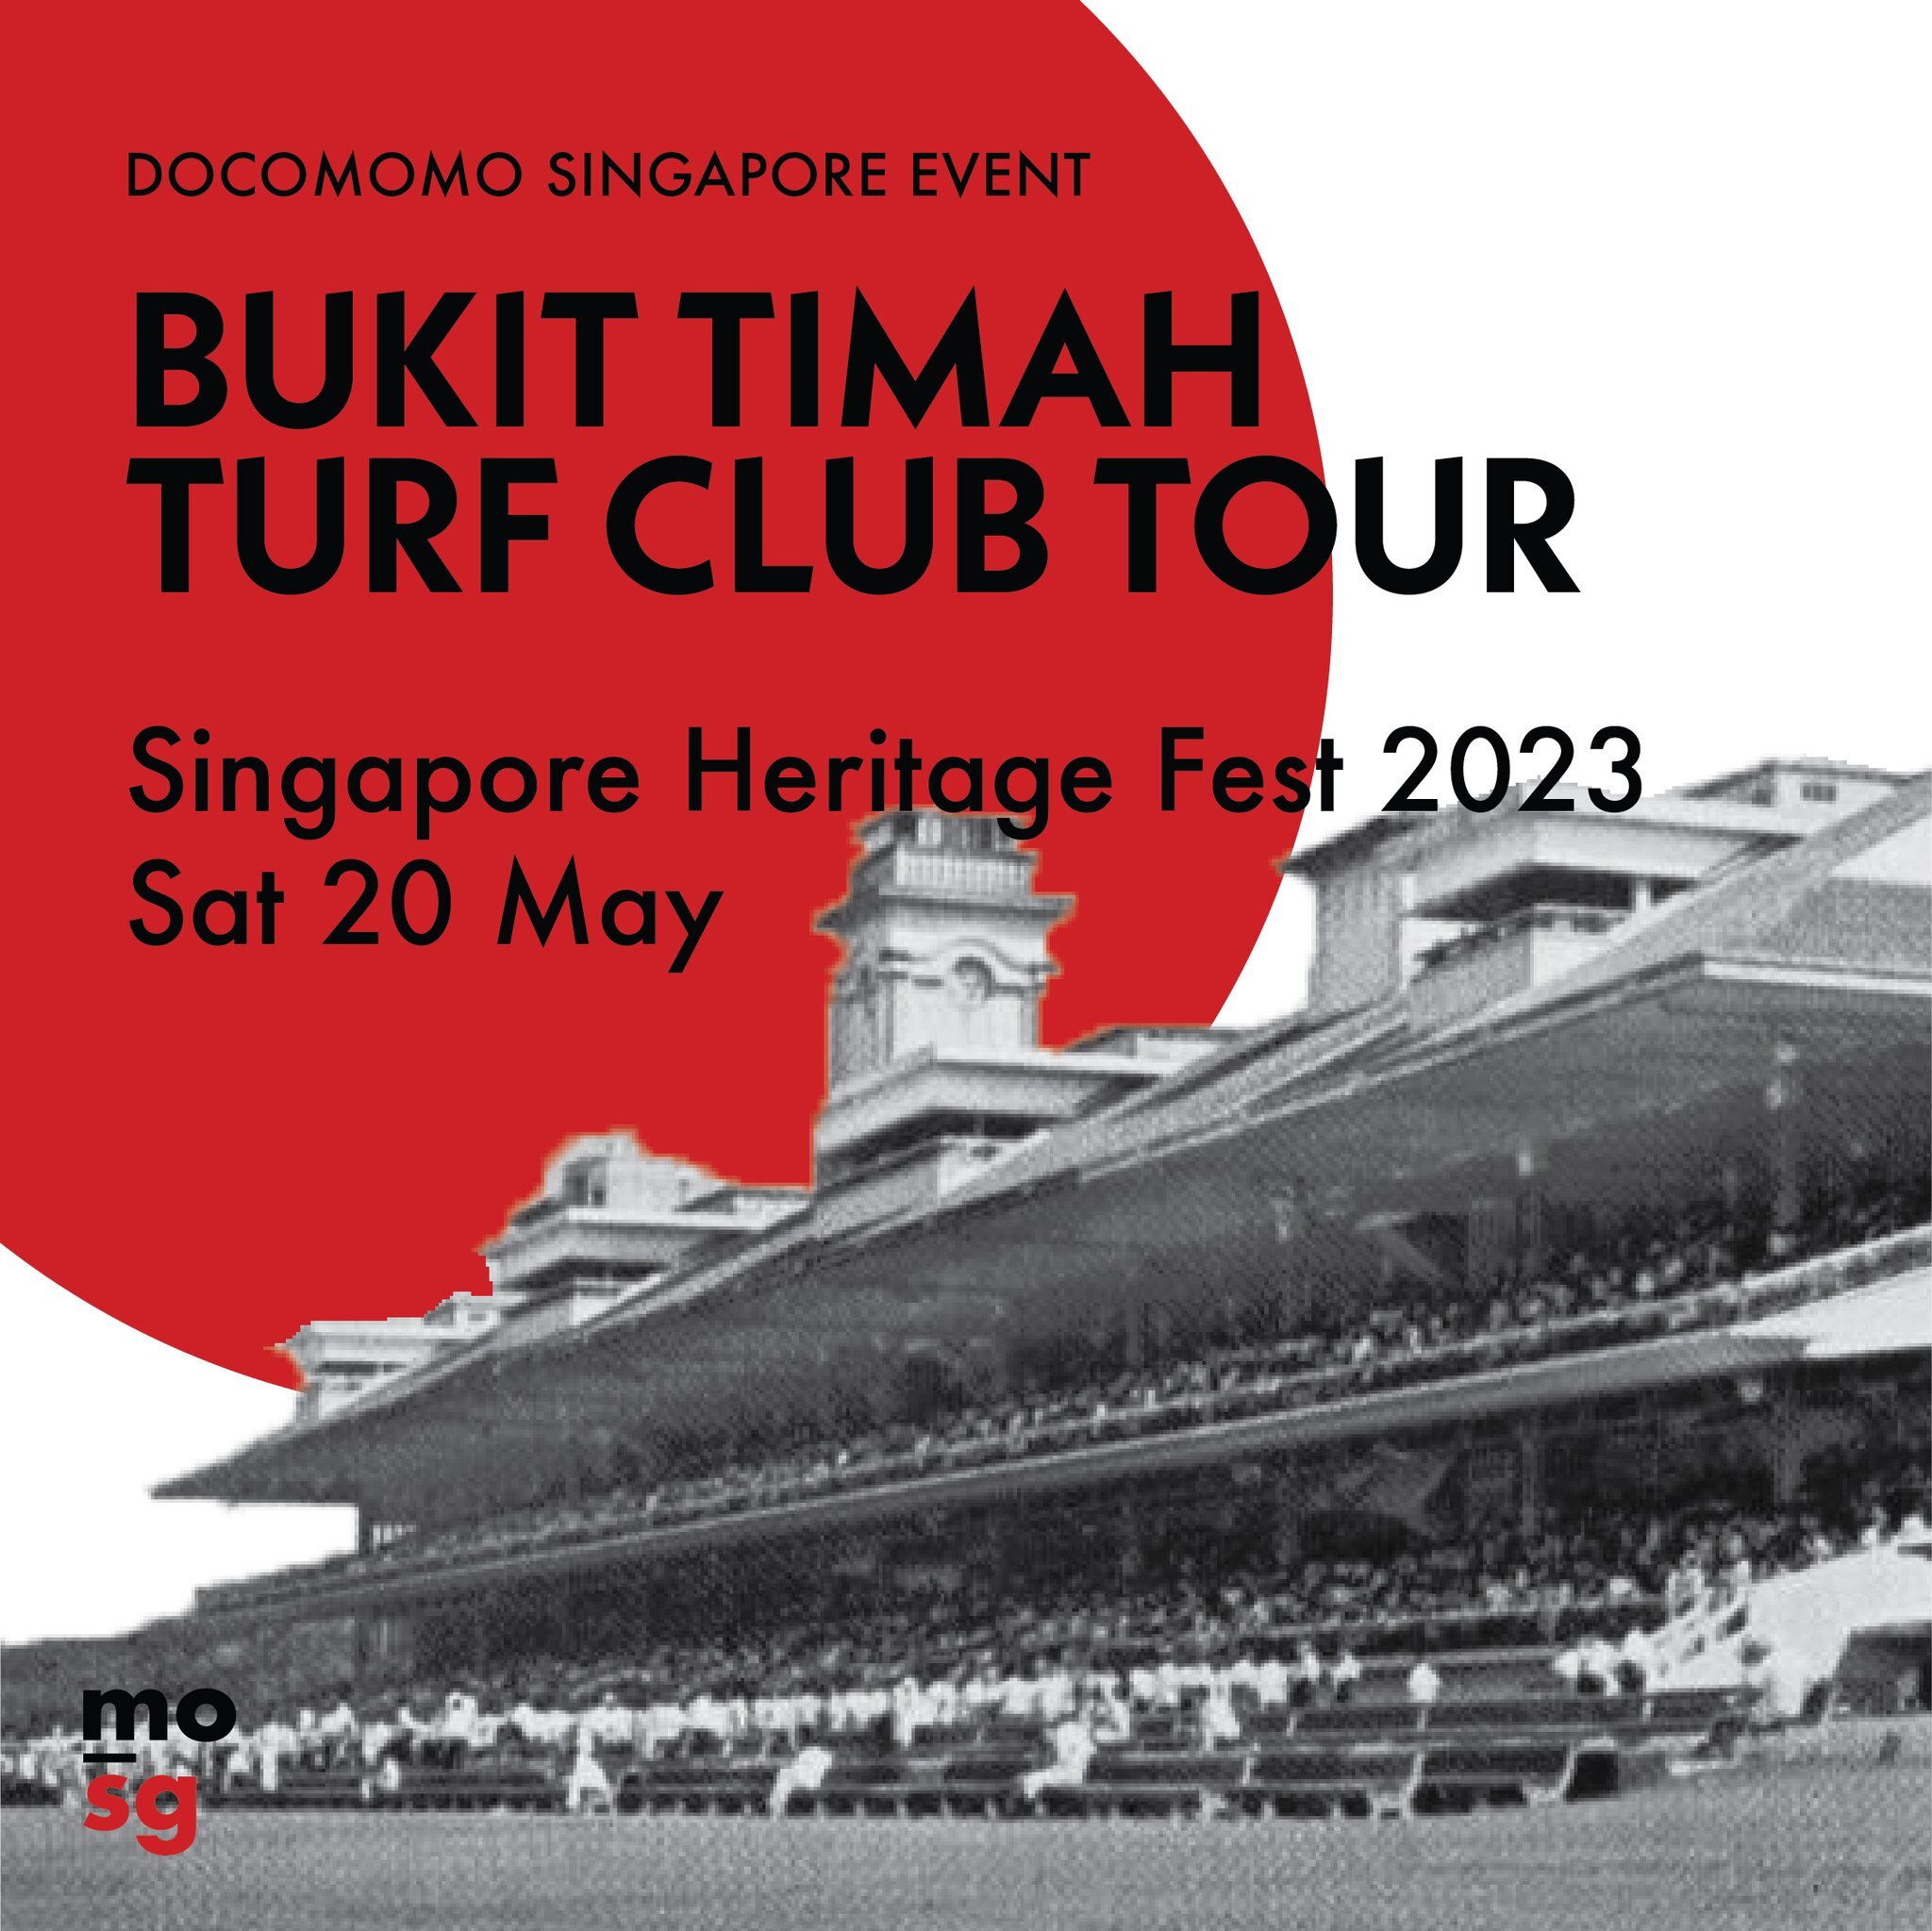 Join us on the walking tour and explore one of Singapore&rsquo;s more unusual 20th century modern landscapes replete with vast lawns and lush greenery - recently earmarked for future redevelopment. 

Tickets are $50 that goes to support our conservat